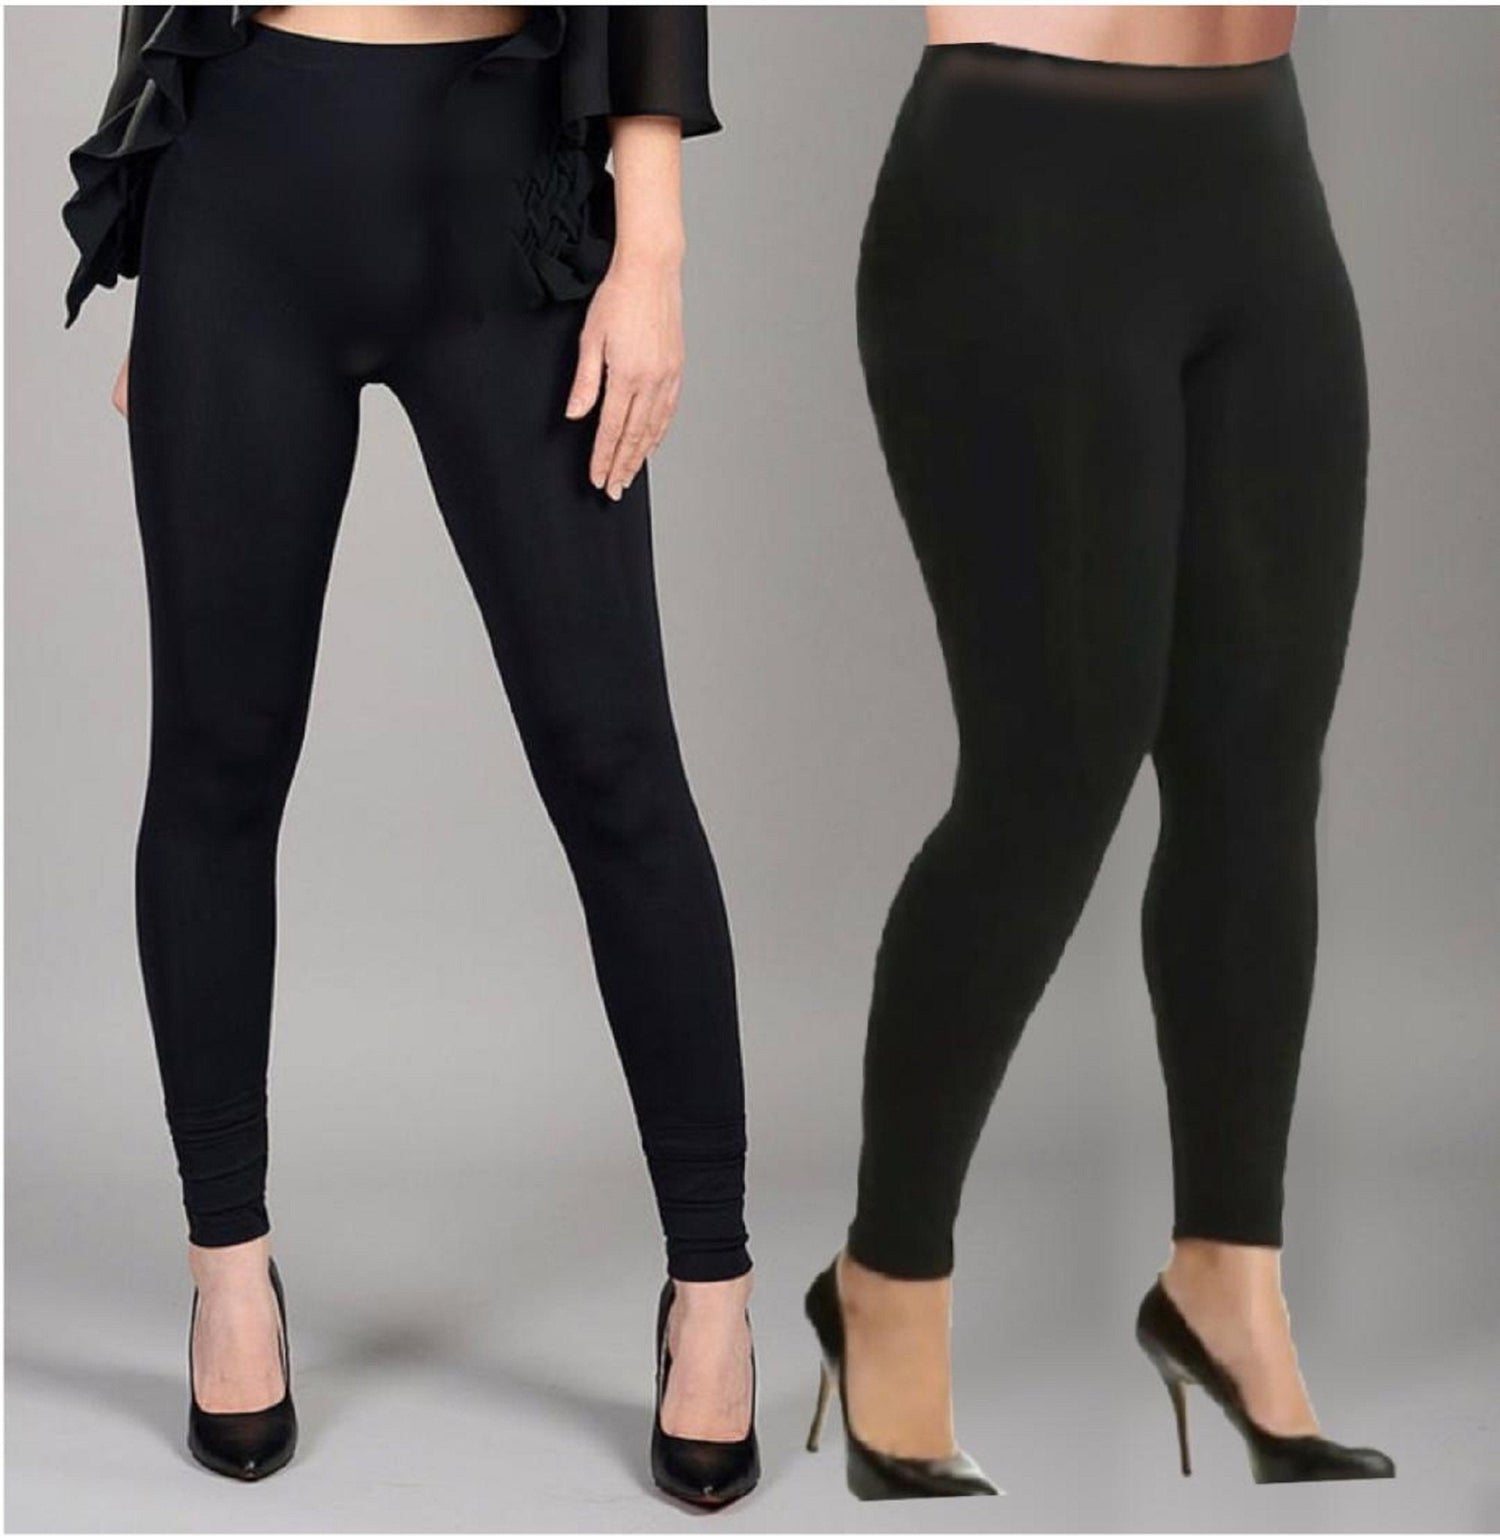 Stretchable Black Leggings Pants sizes from OS to XL